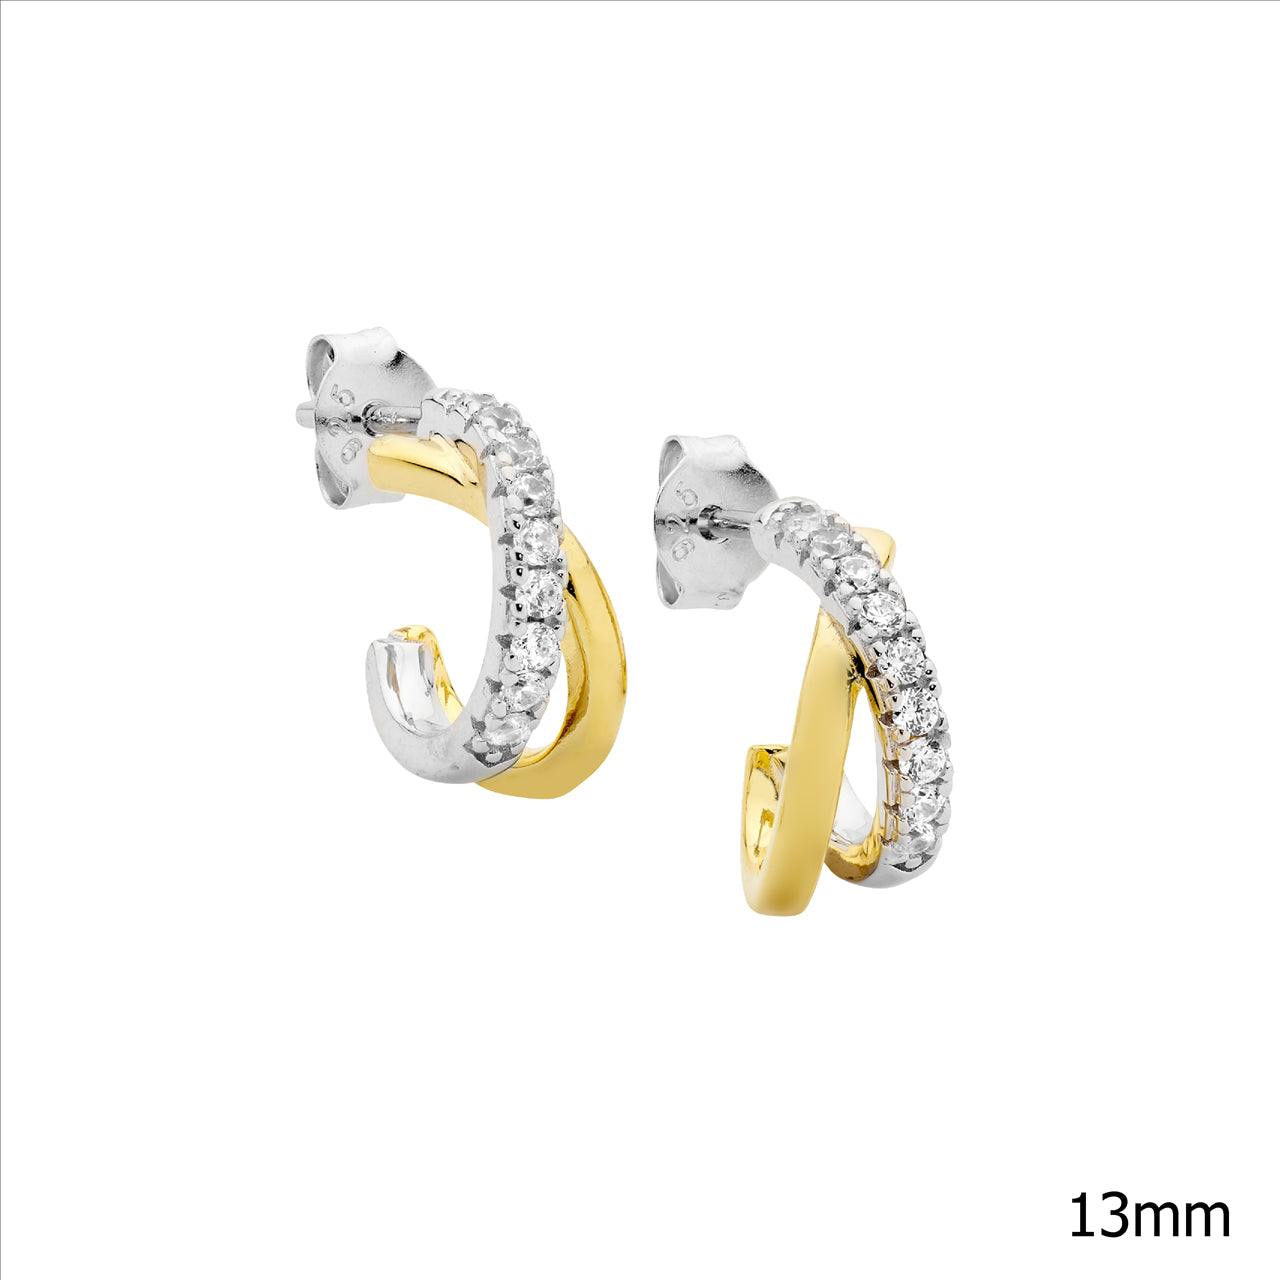 Sterling Silver Gold Plated 13mm Cross Over Hoop Stud Earrings Set With White Cubic Zirconia's